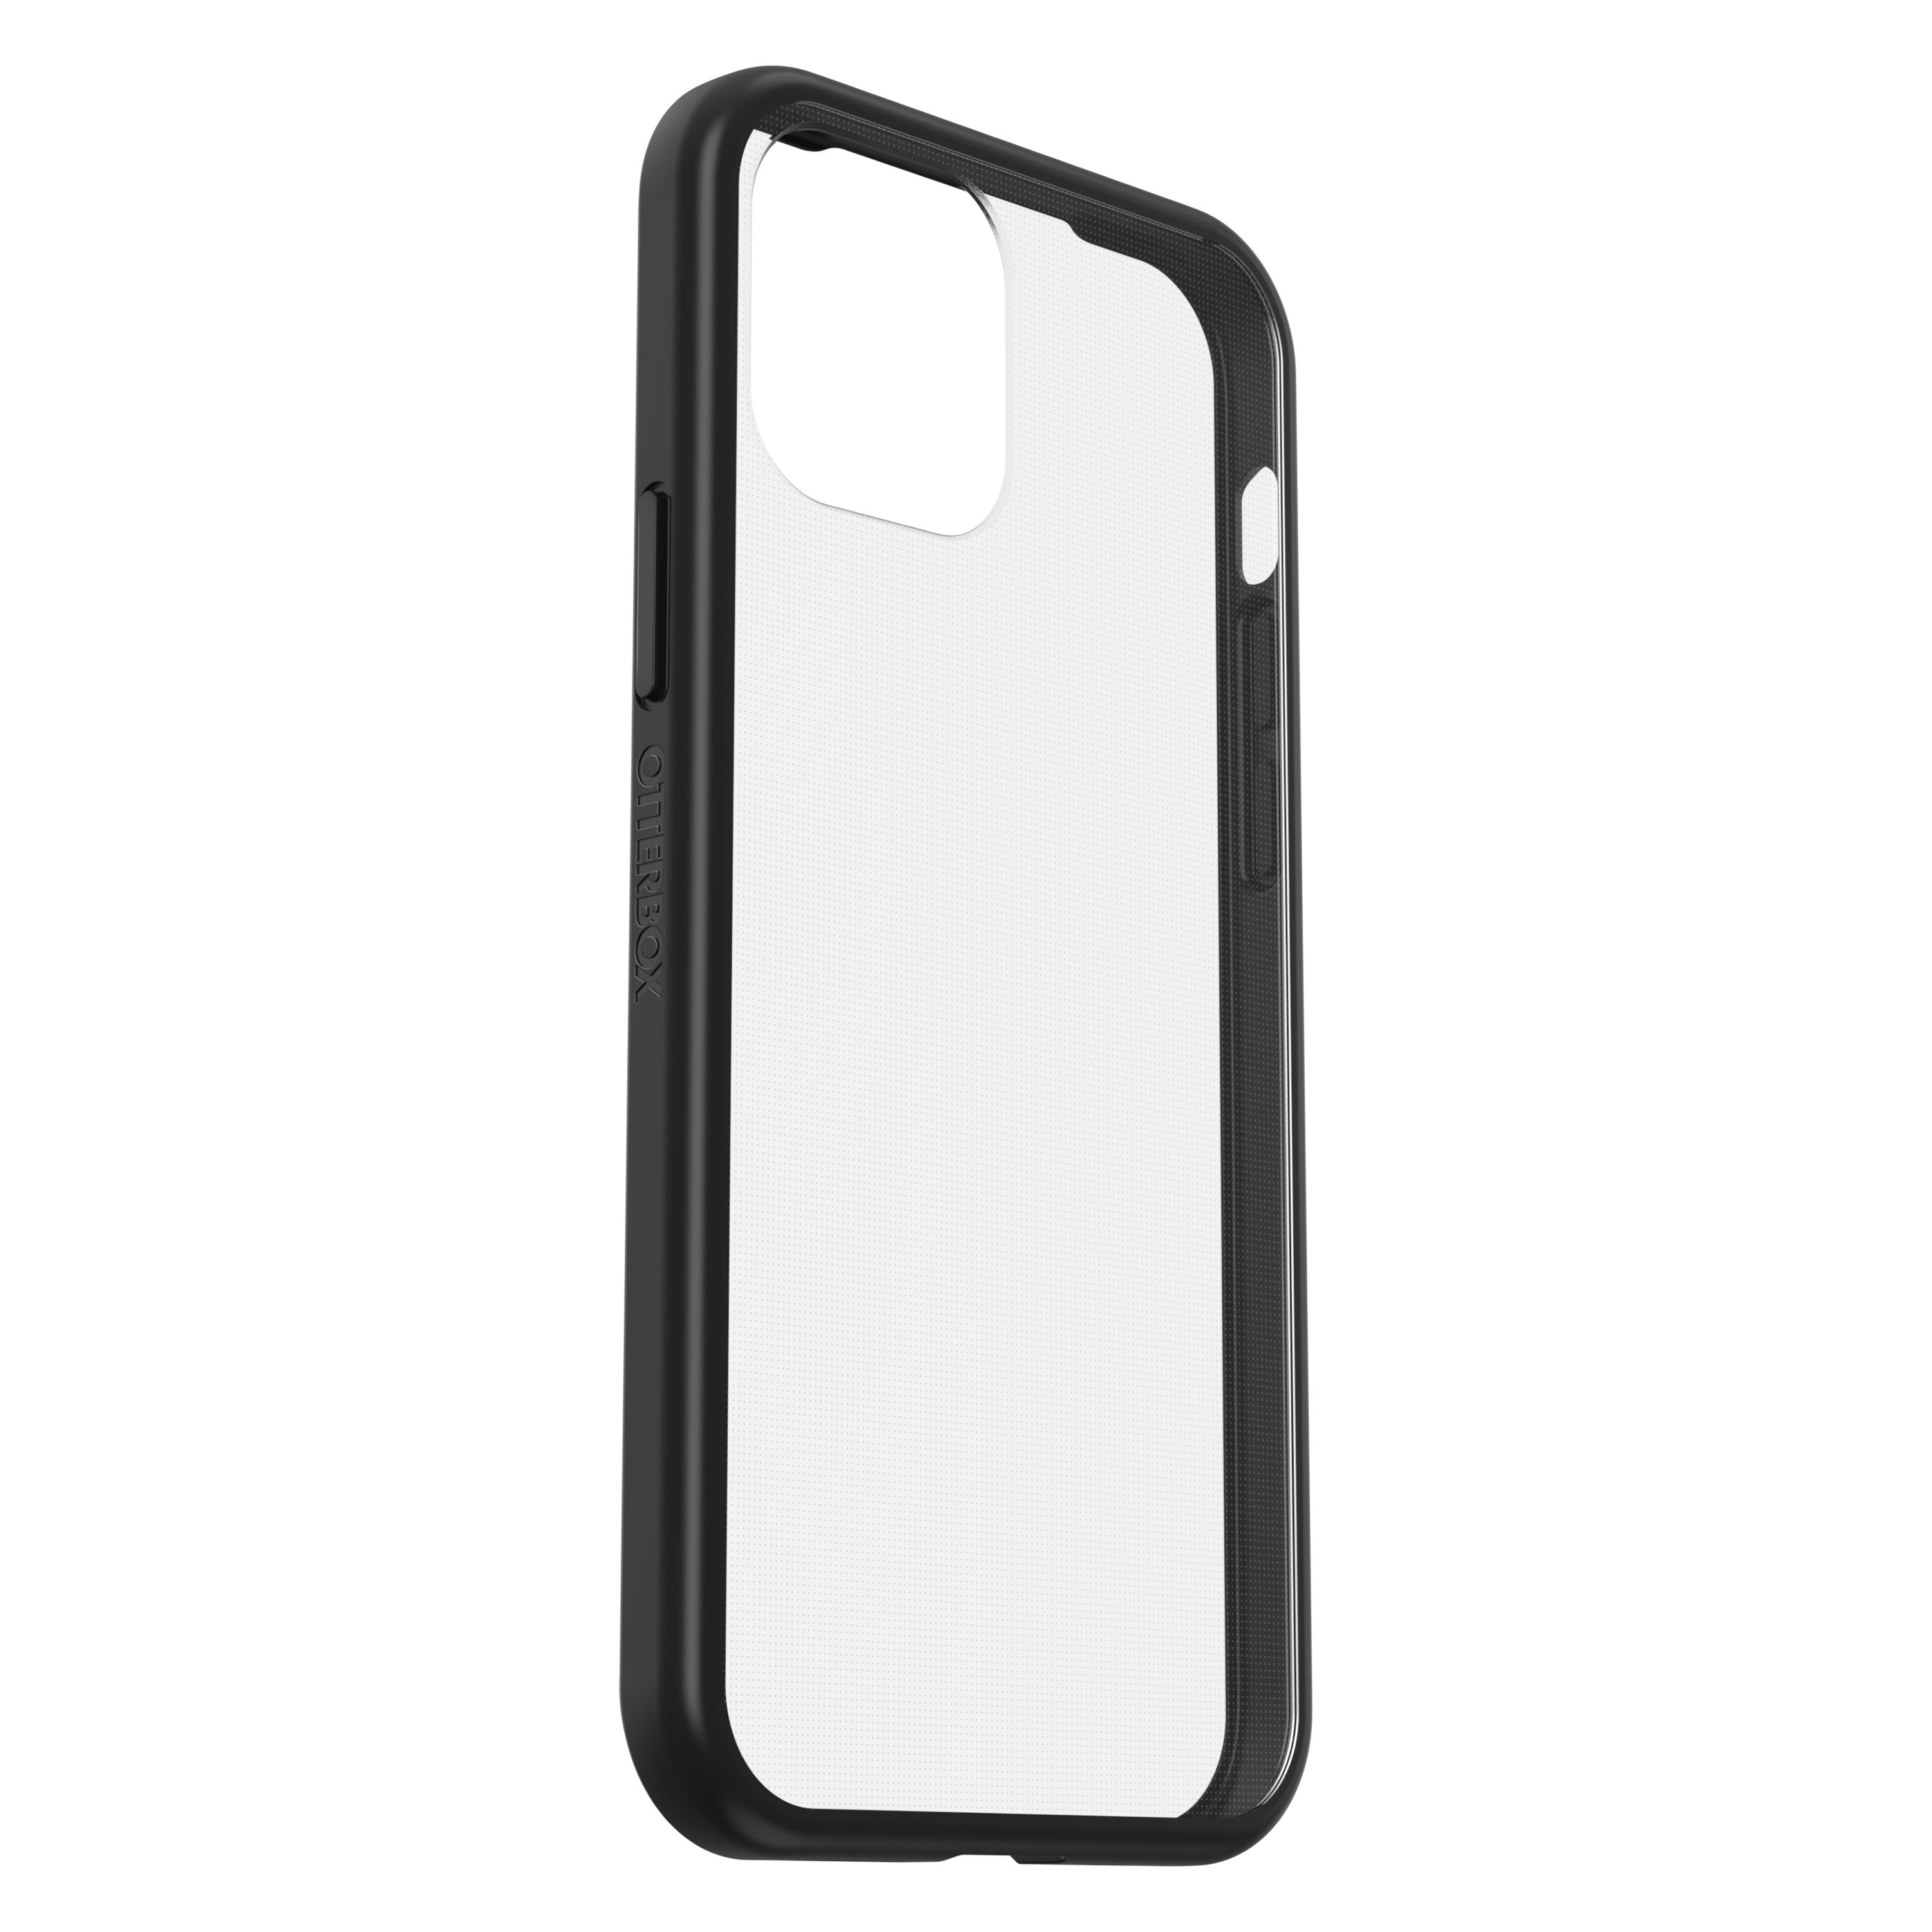 OtterBox Apple iPhone 12 / 12 Pro React Clear case - Ultra-Slim and Lightweight Cover w/ Military Grade Drop Protection, Wireless Charging Compatible - Clear w/ Black Frame